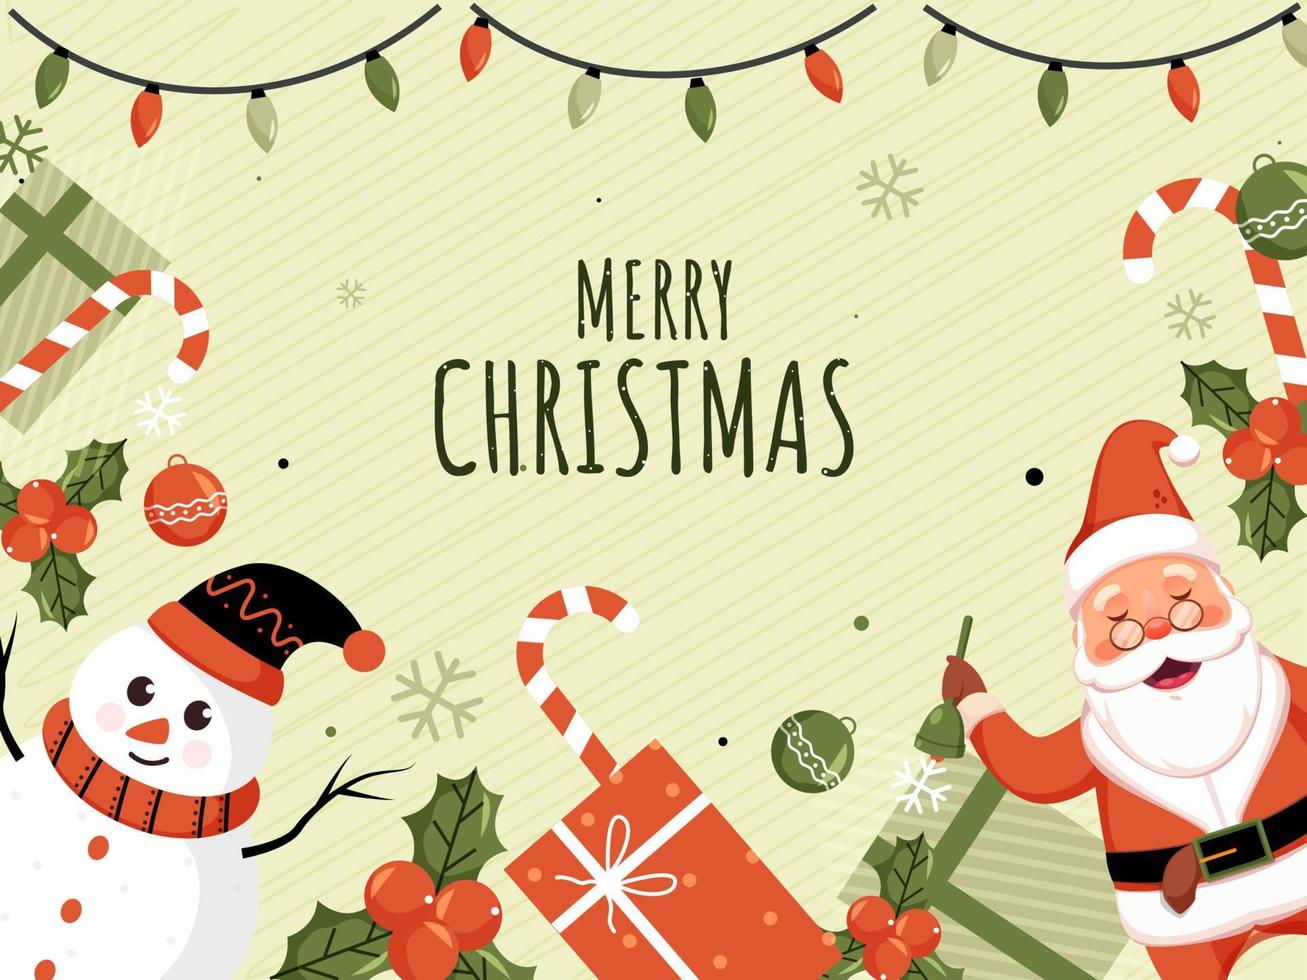 Illustration of Cheerful Santa Claus Holding Bell with Cartoon Snowman, Gift Boxes, Holly Berries, Candy Cane, Bauble and Lighting Garland Decorated Striped Background for Merry Christmas. vector